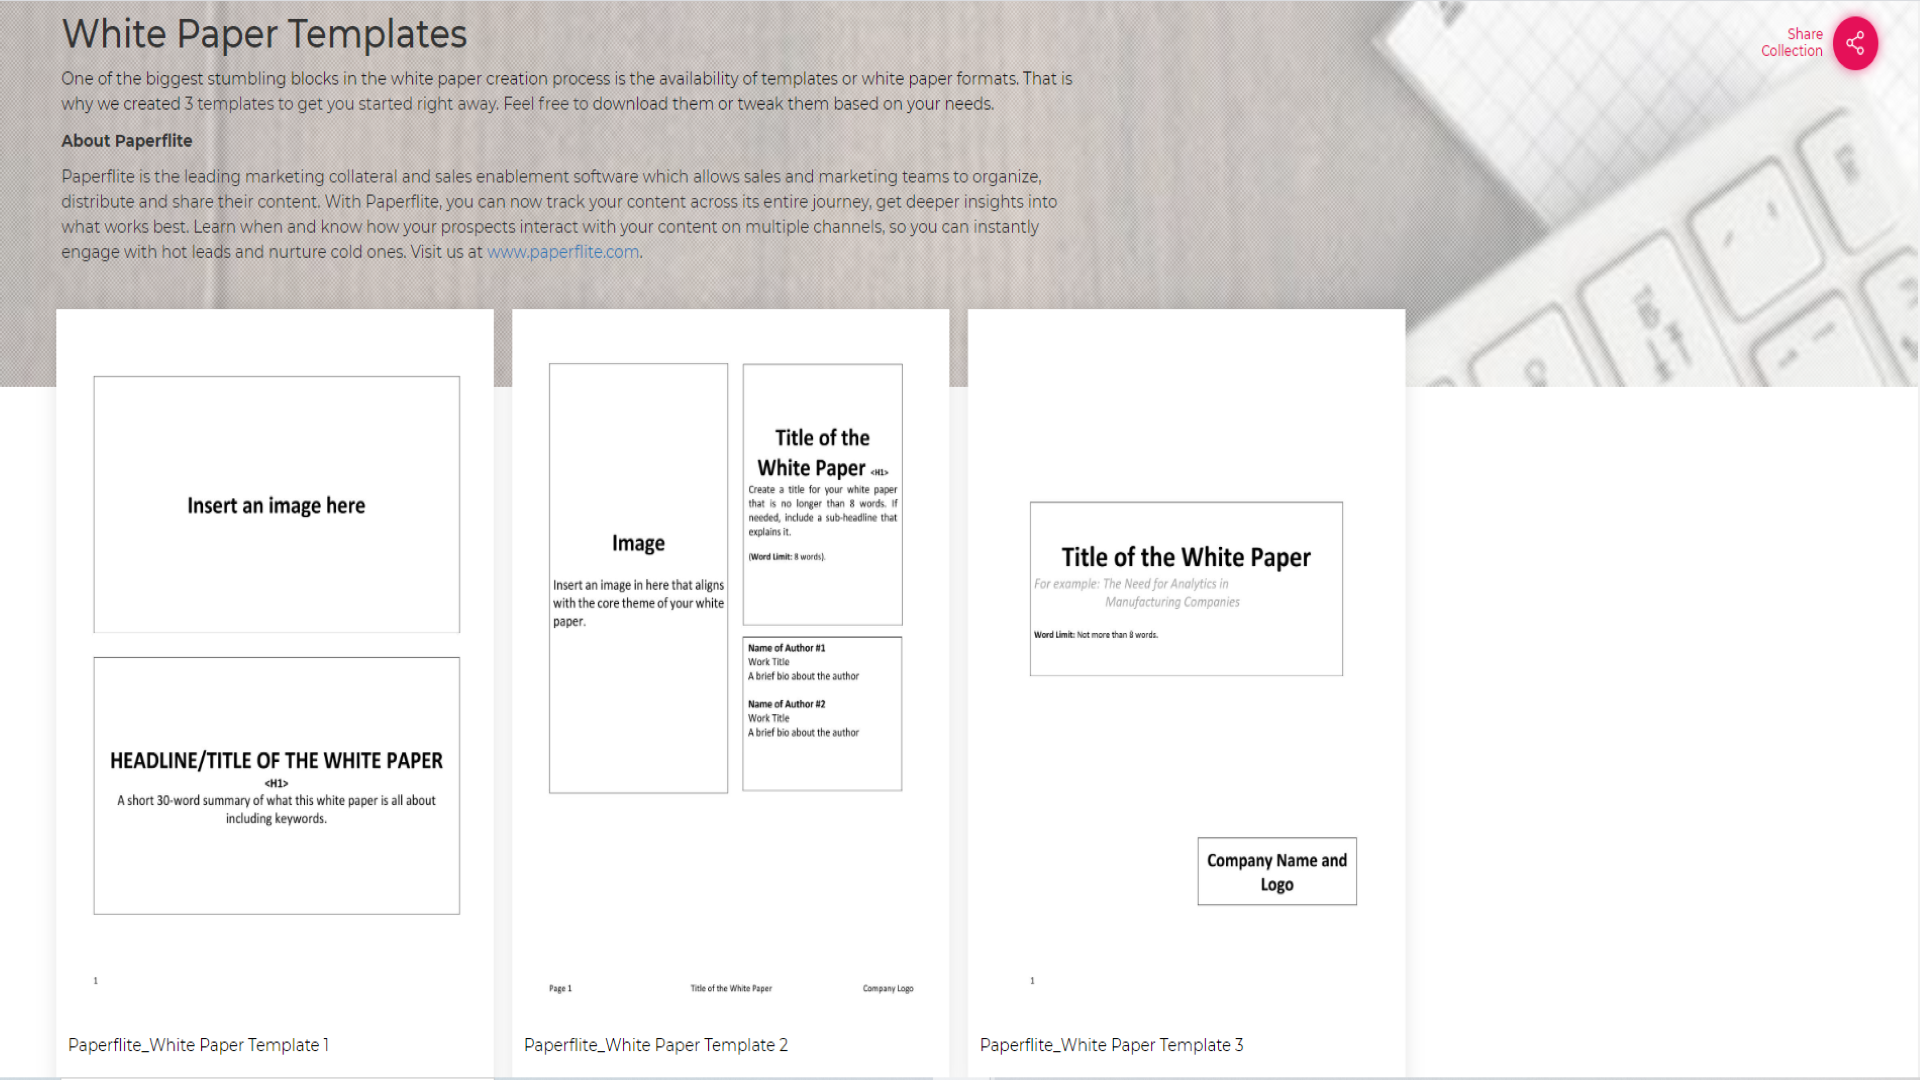 The Best WhitePaper Templates